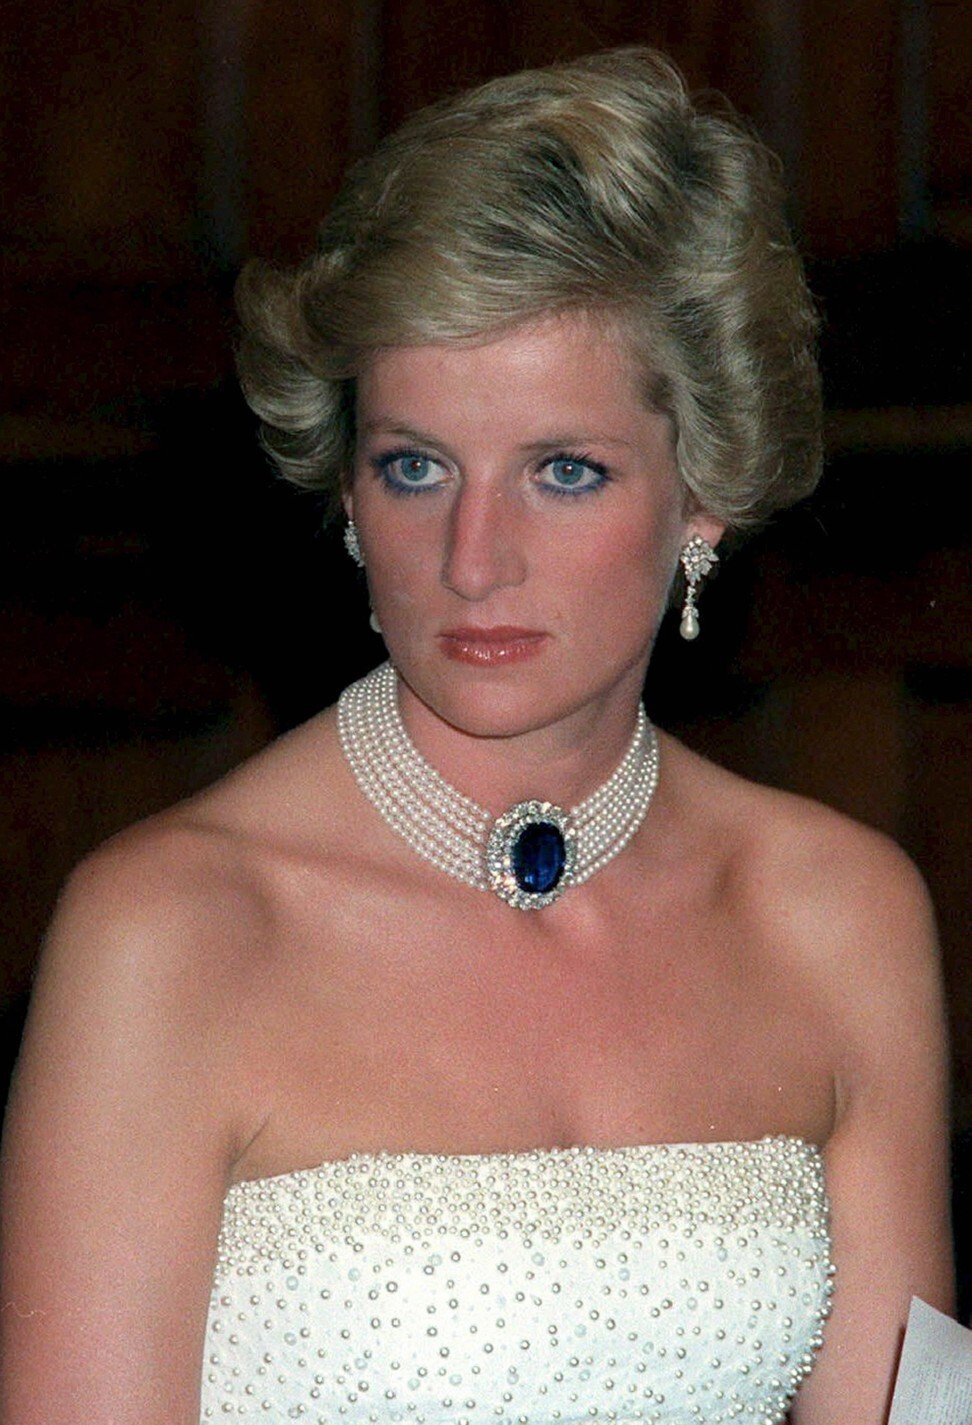 Princess Diana was ahead of the food fads with her health-conscious eating habits. Photo: EPA